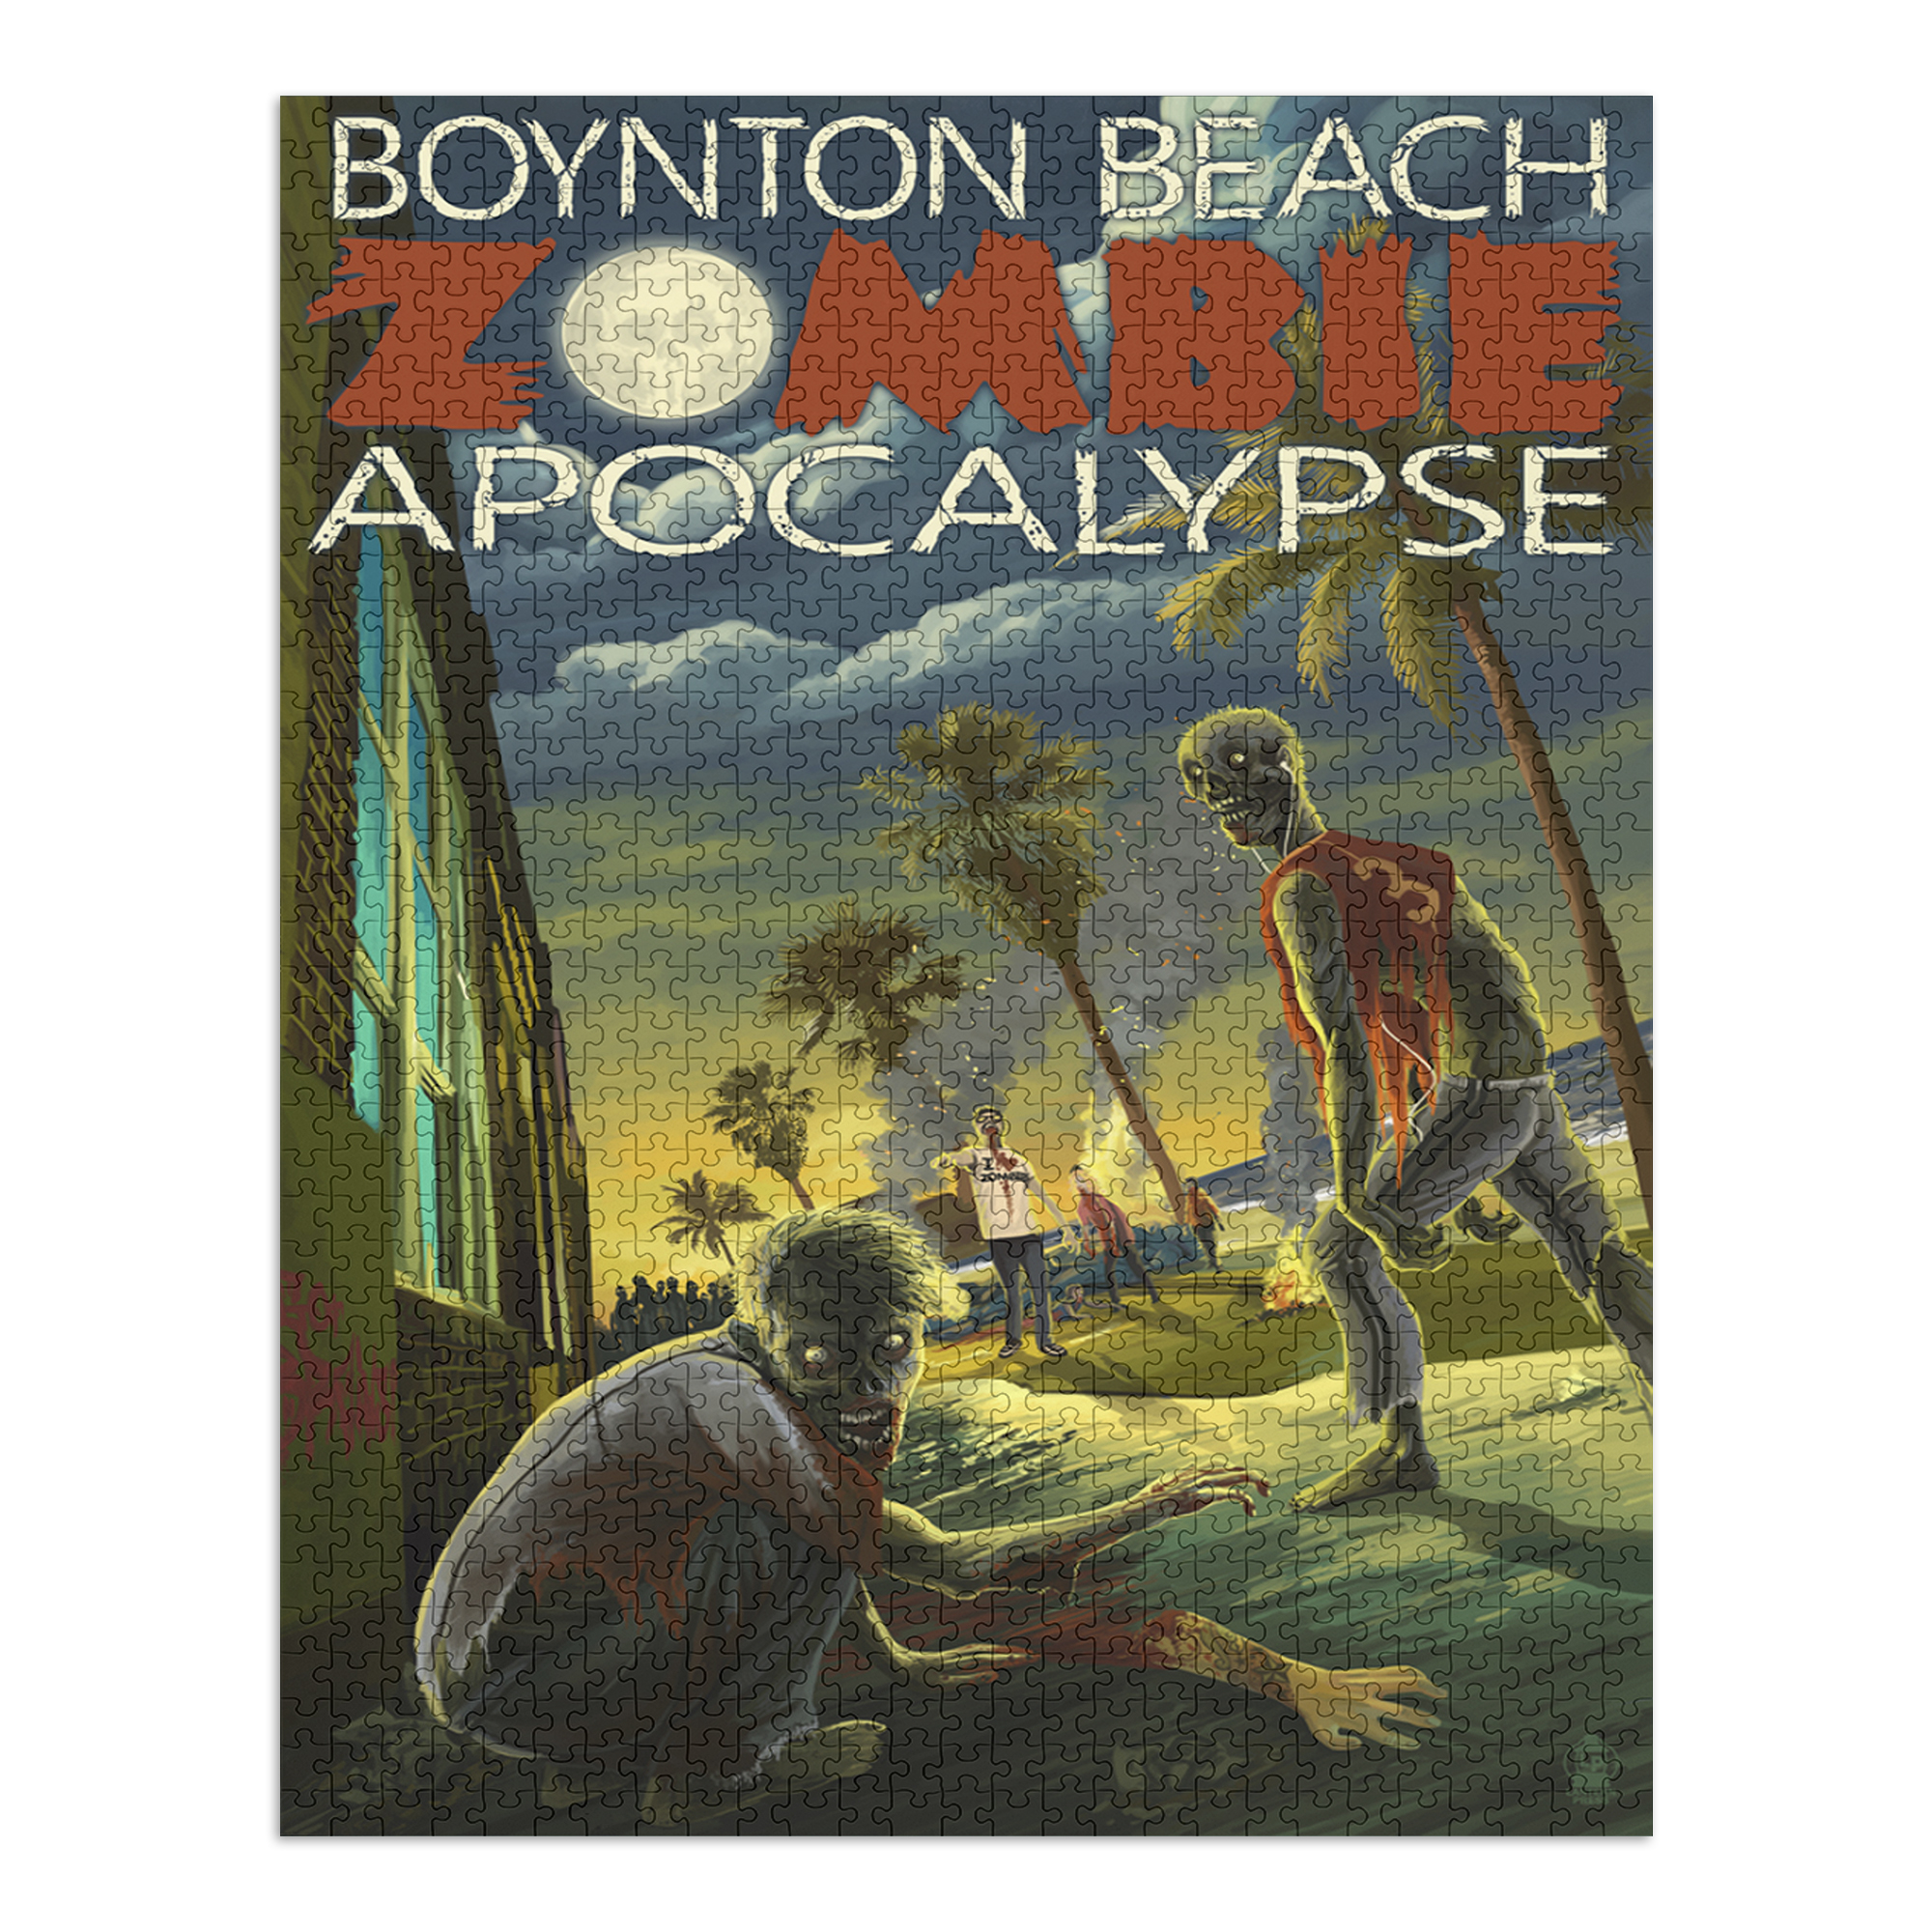 Boynton Beach, Florida, Zombie Apocalypse (1000 Piece Puzzle, Size 19x27, Challenging Jigsaw Puzzle for Adults and Family, Made in USA) - image 2 of 4